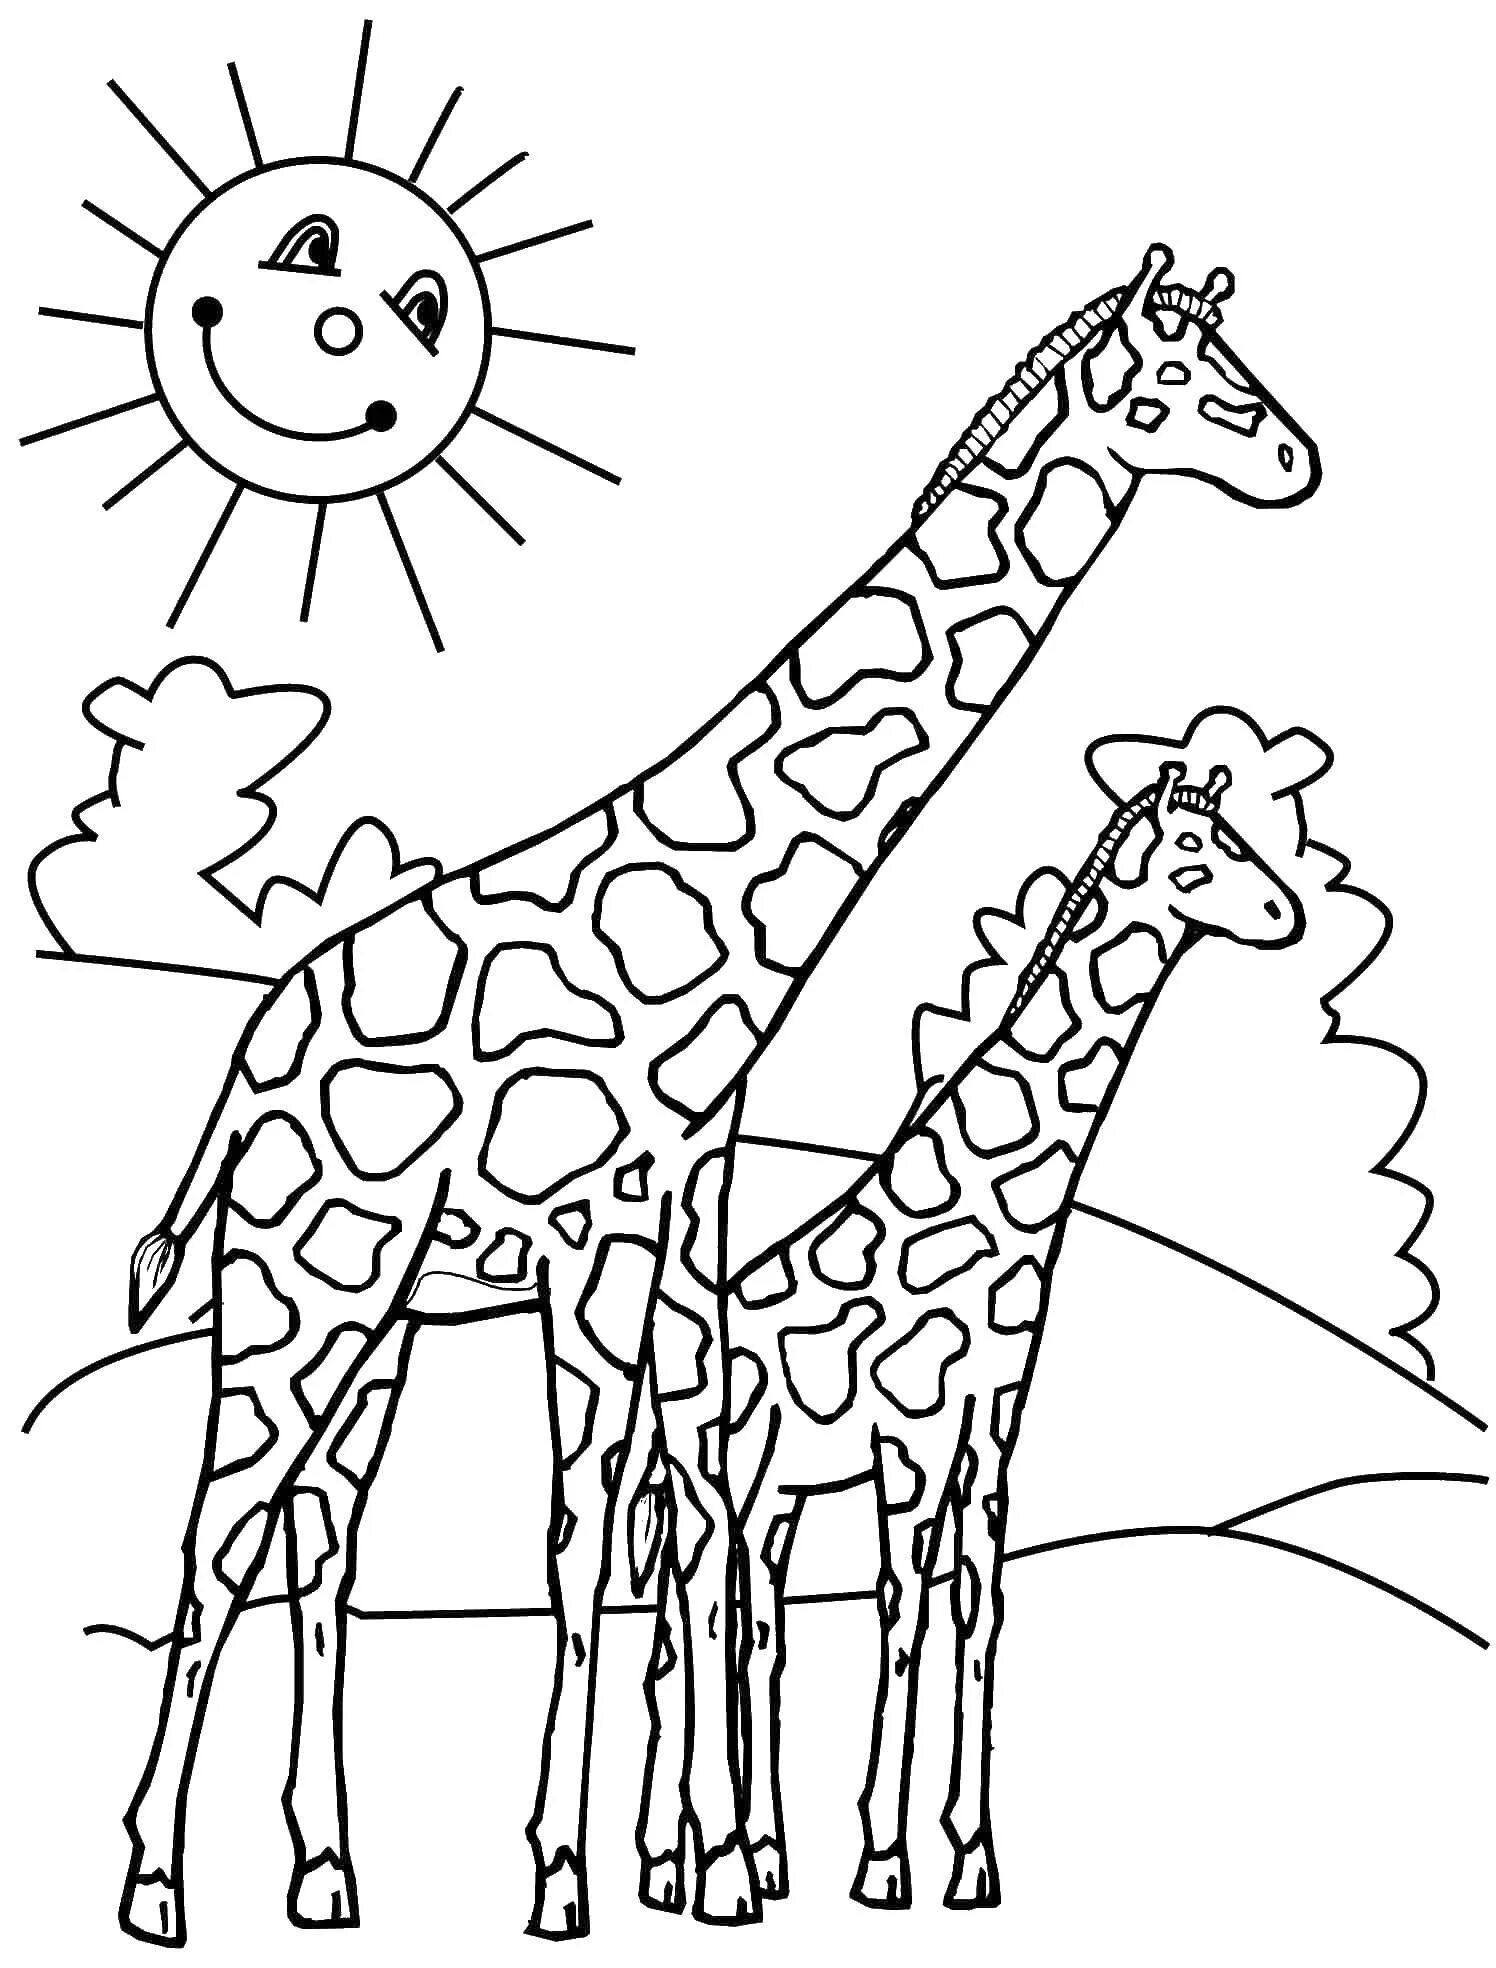 A wonderful giraffe coloring book for the little ones